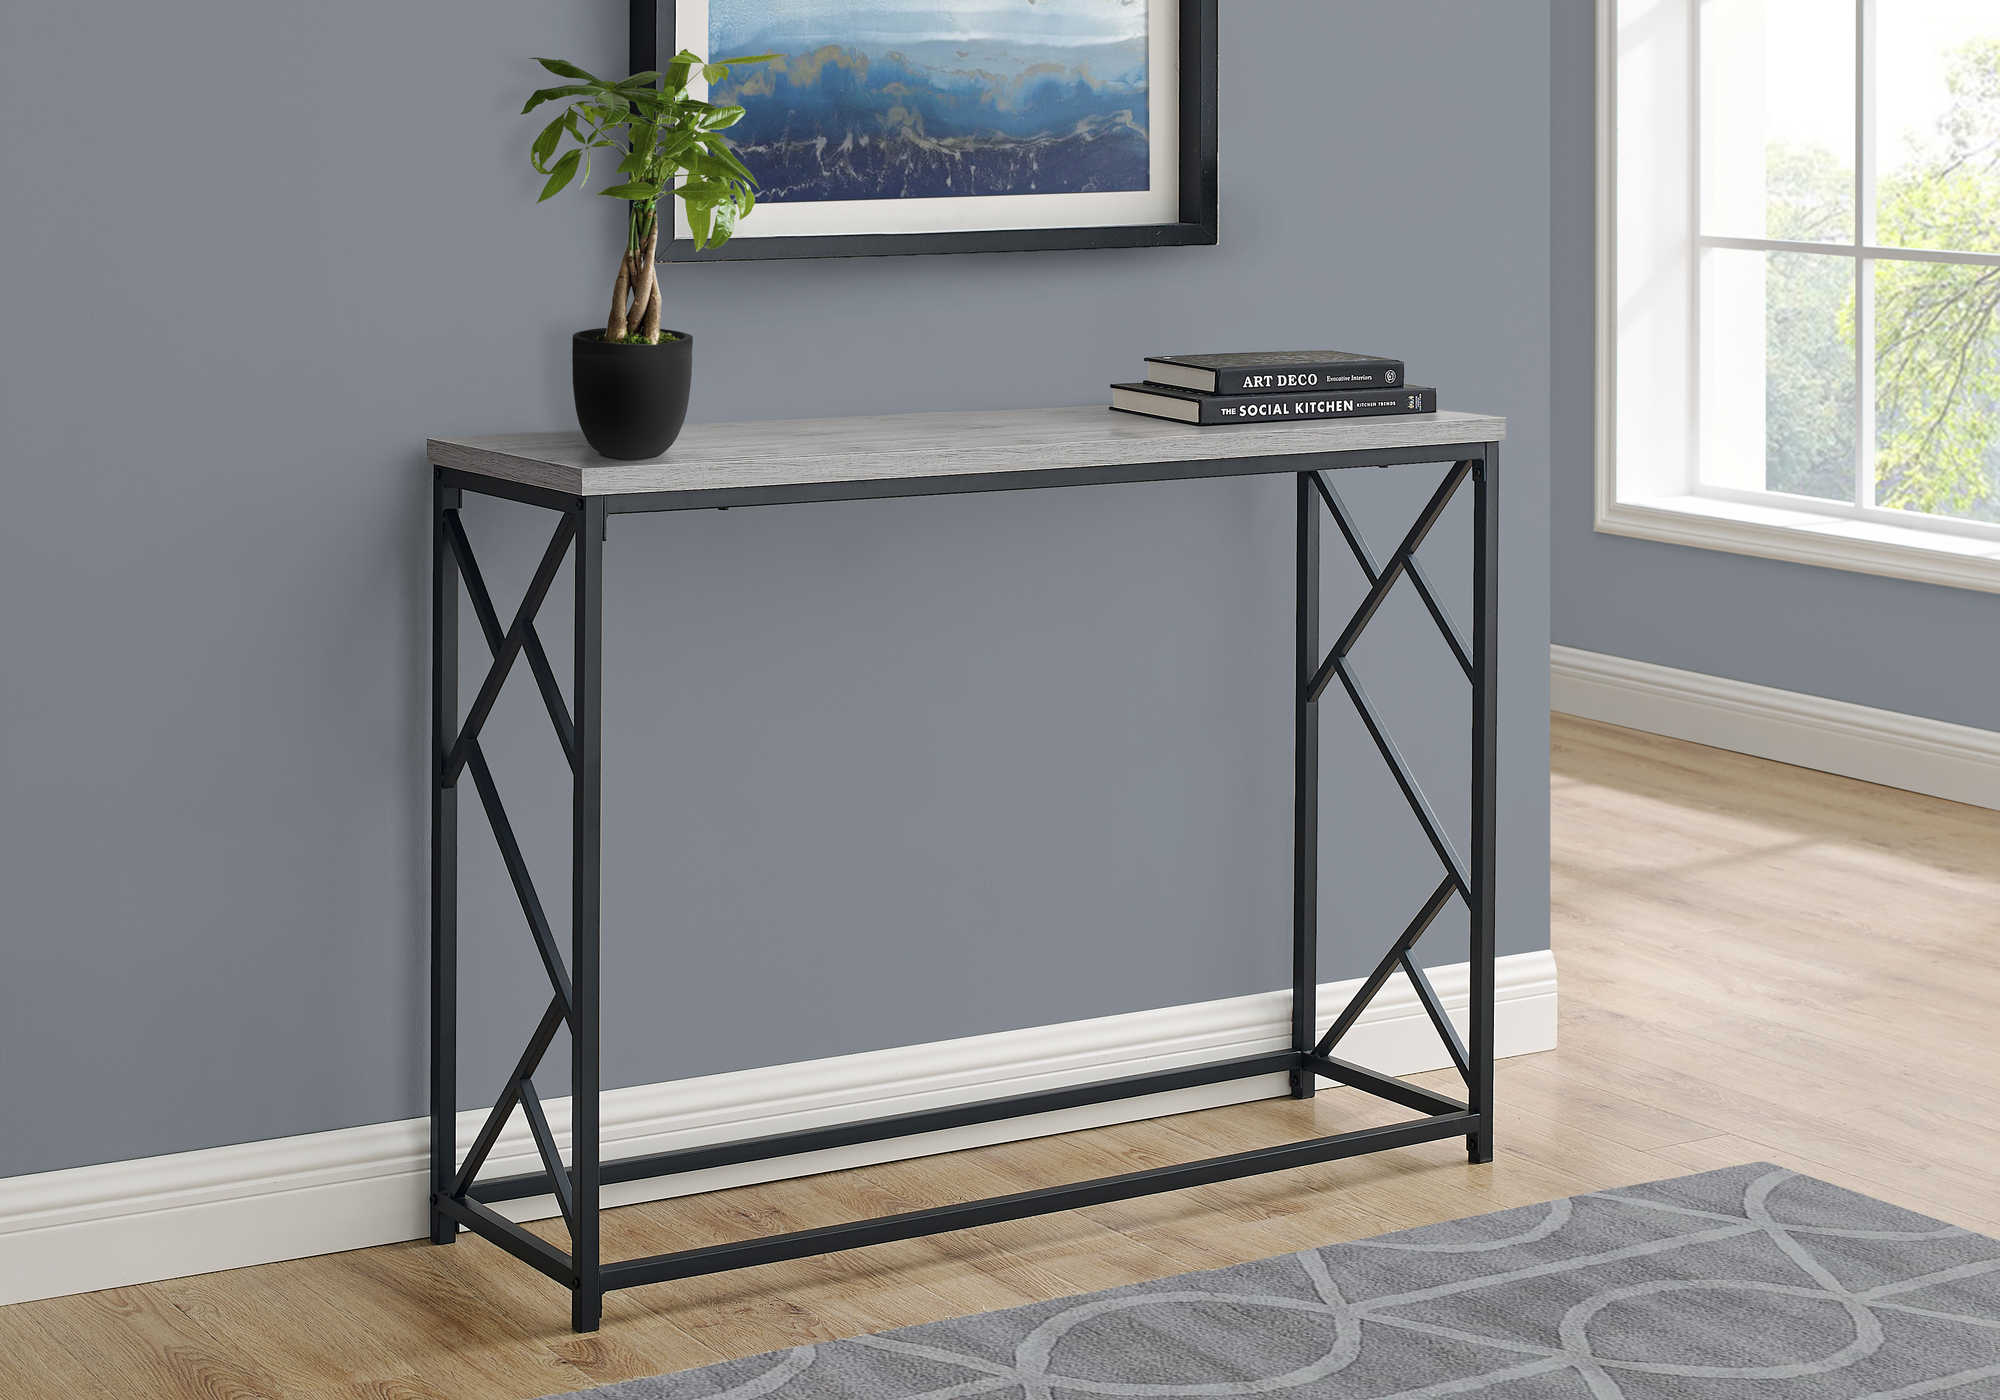 BEDROOM ACCENT CONSOLE TABLE - 44"L / GREY / BLACK METAL HALL CONSOLE